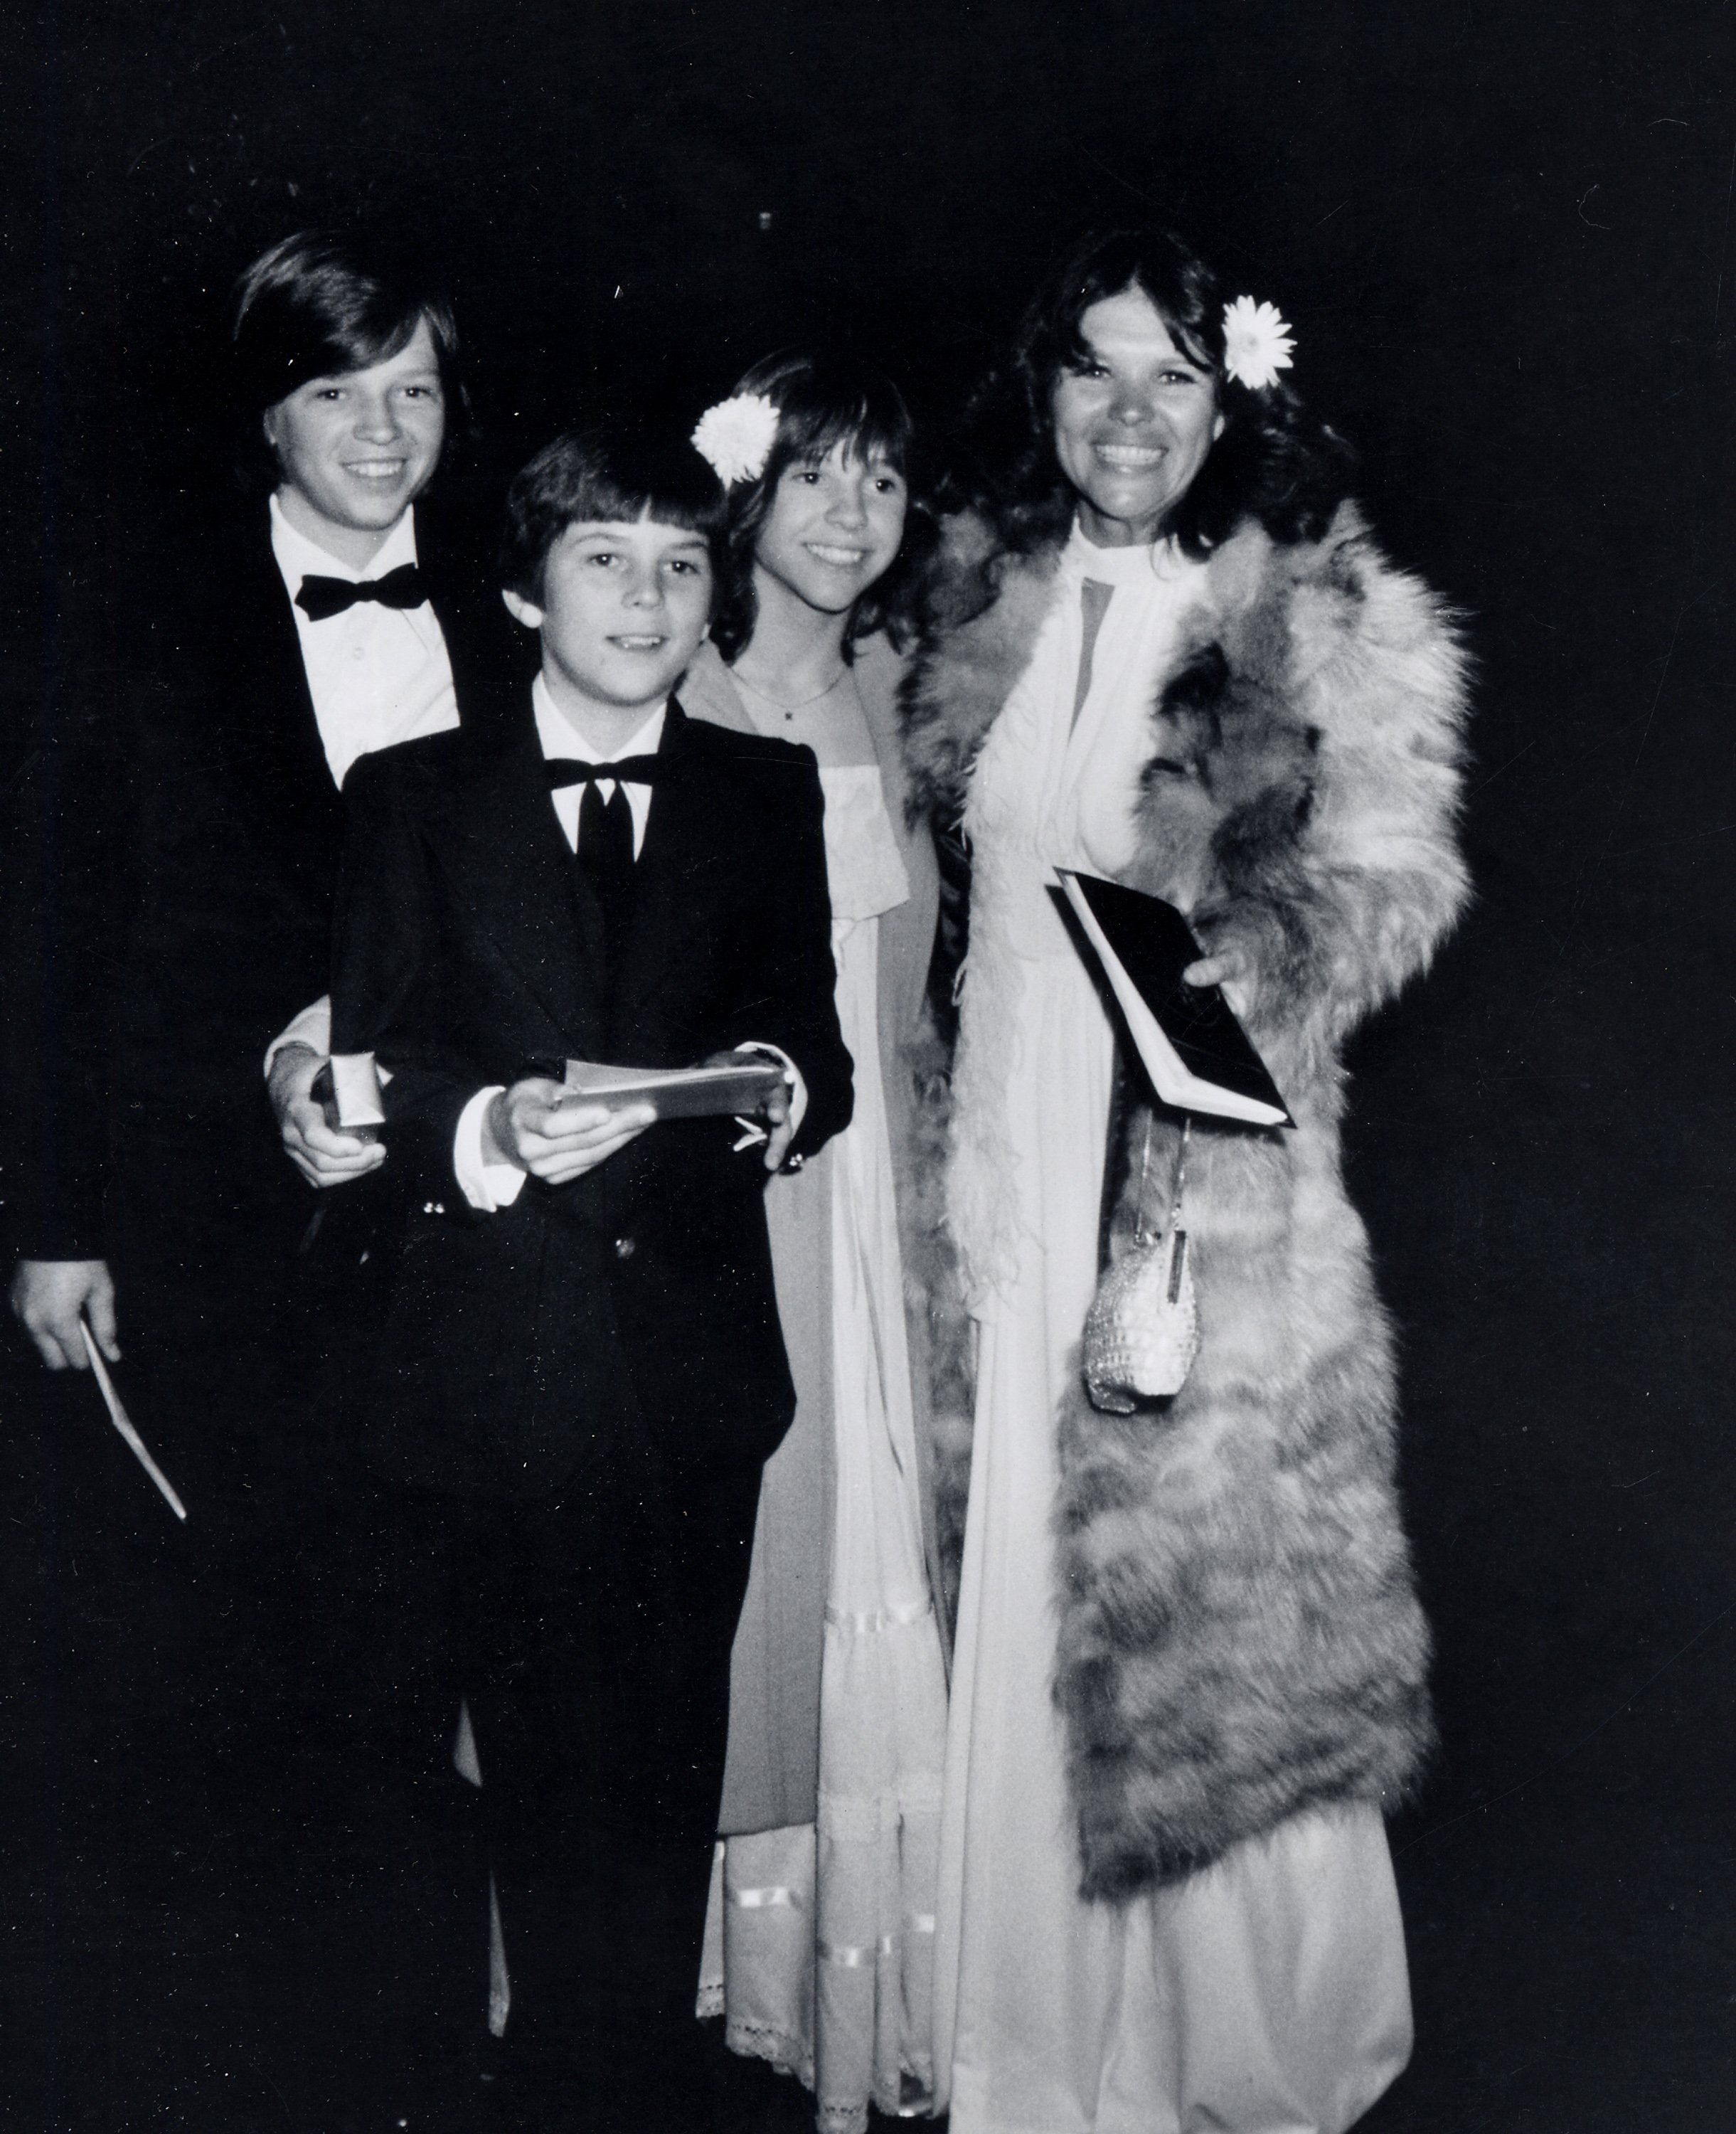 Kristy, Thomas, and Jimmy McNichol with their mother Carollyne McNichol Lucas at The Television Critics Circle Awards on April 11, 1977, in Los Angeles, California. | Source: Ron Galella/Ron Galella Collection/Getty Images